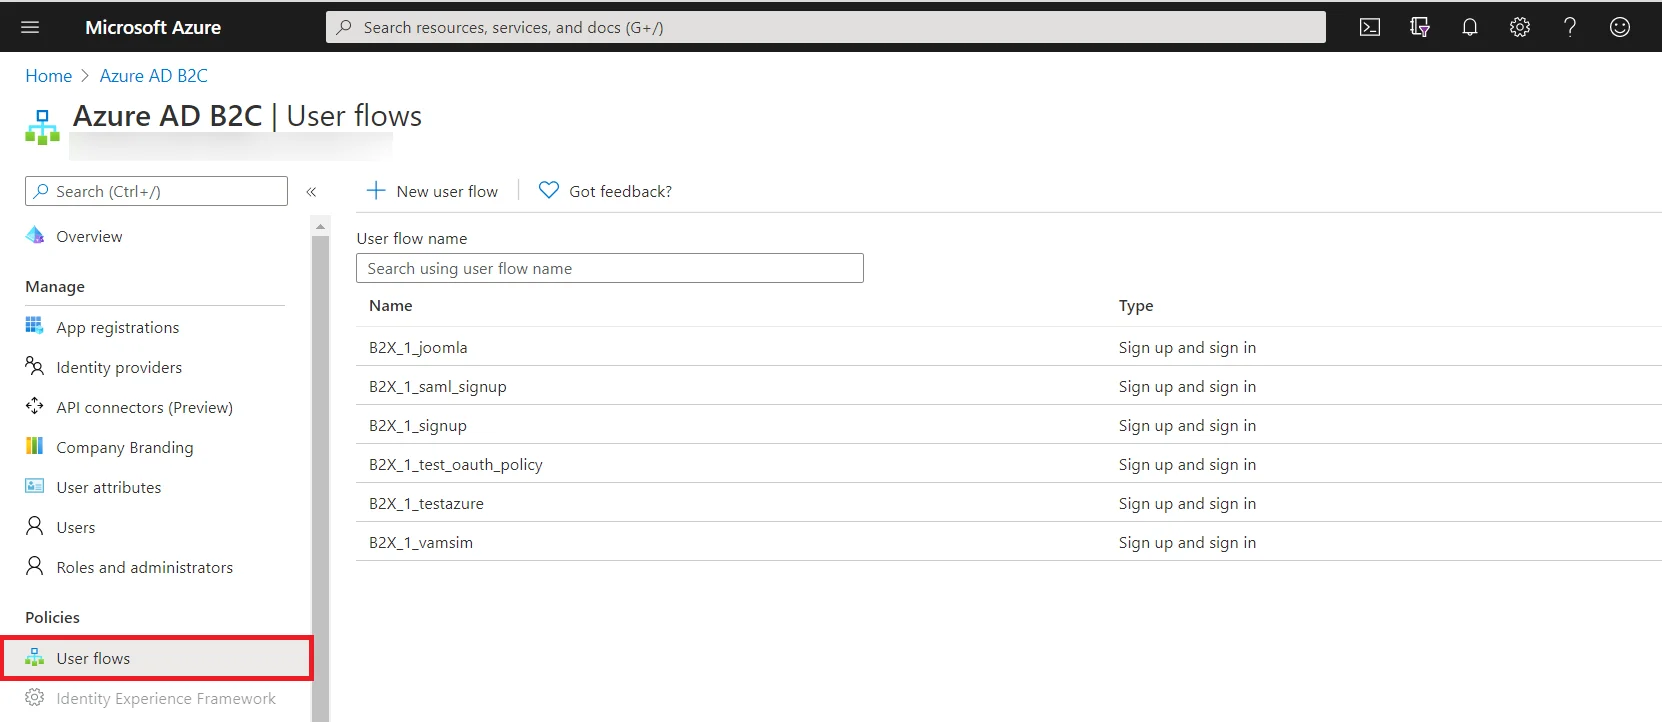 Umbraco OAuth/OIDC Single Sign-On (SSO) using AzureAD B2C as IDP (OAuth Provider) - click on user flow 